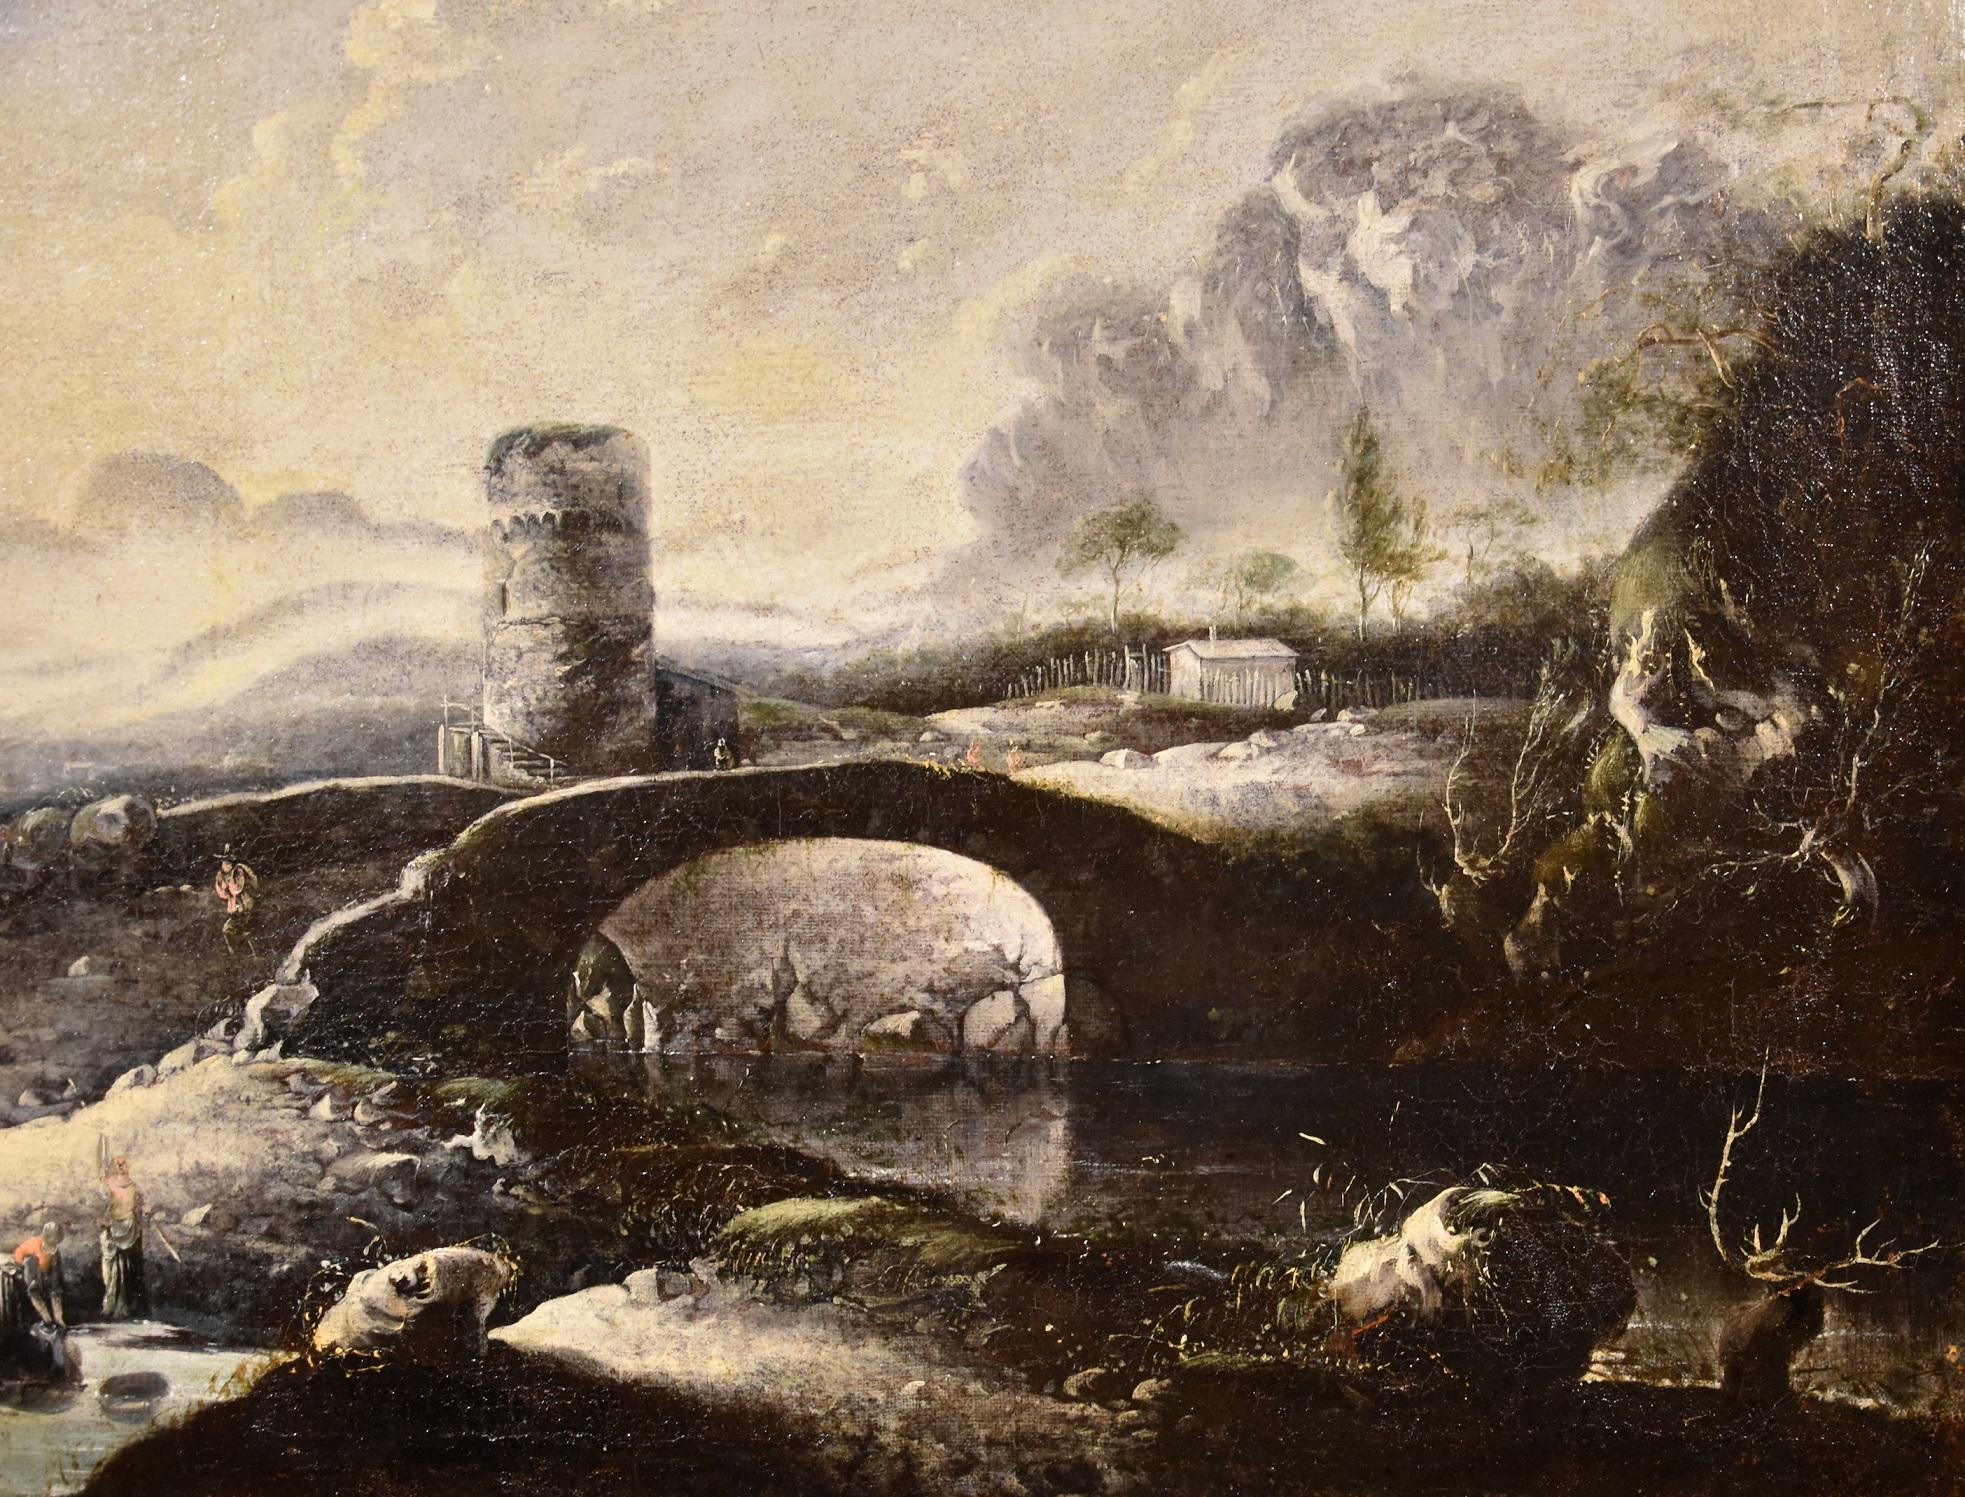 Hans de Jode (The Hague, 1630 - Vienna, 1663)
Fantasy winter landscape with bridge and tower

About 1650
Oils on canvas (62 x 93, in frames 82 x 112)
The work is accompanied by an expertise of Dr. Fred G. Meijer (Amsterdam)

The celebration of